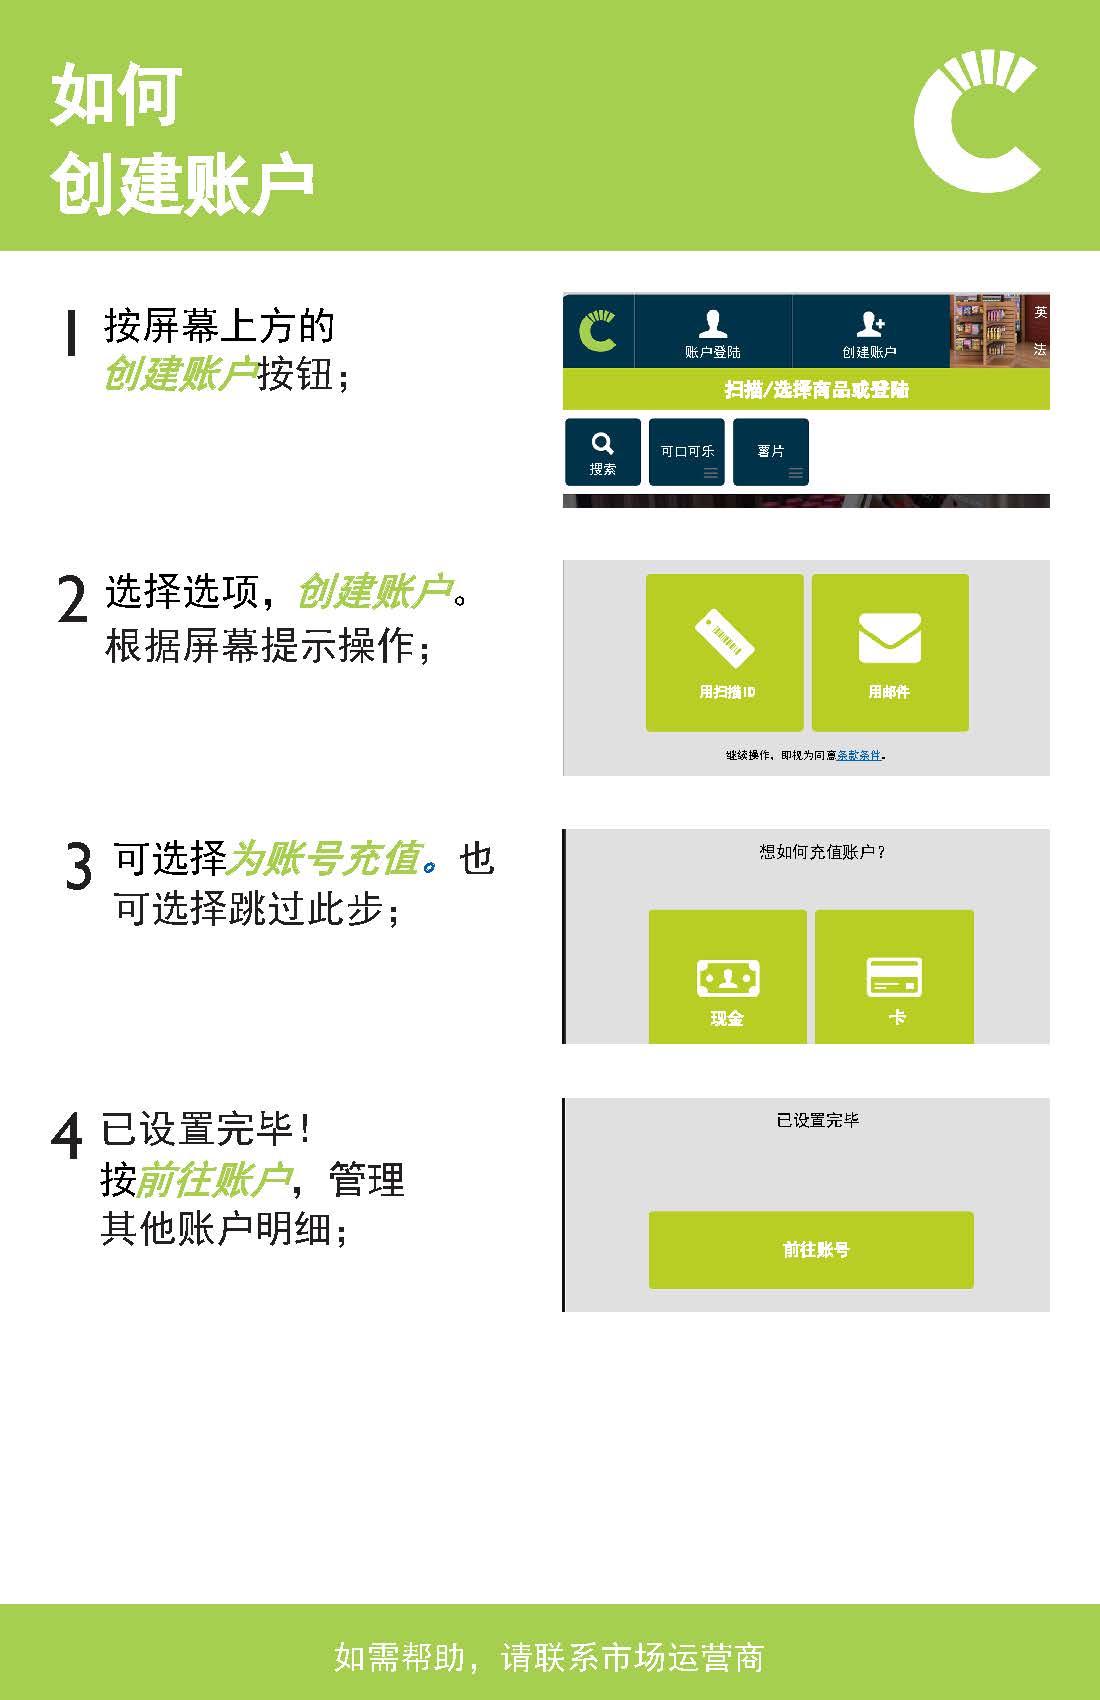 WingCards-V5-CreateAccount-Canteen-Chinese.jpg